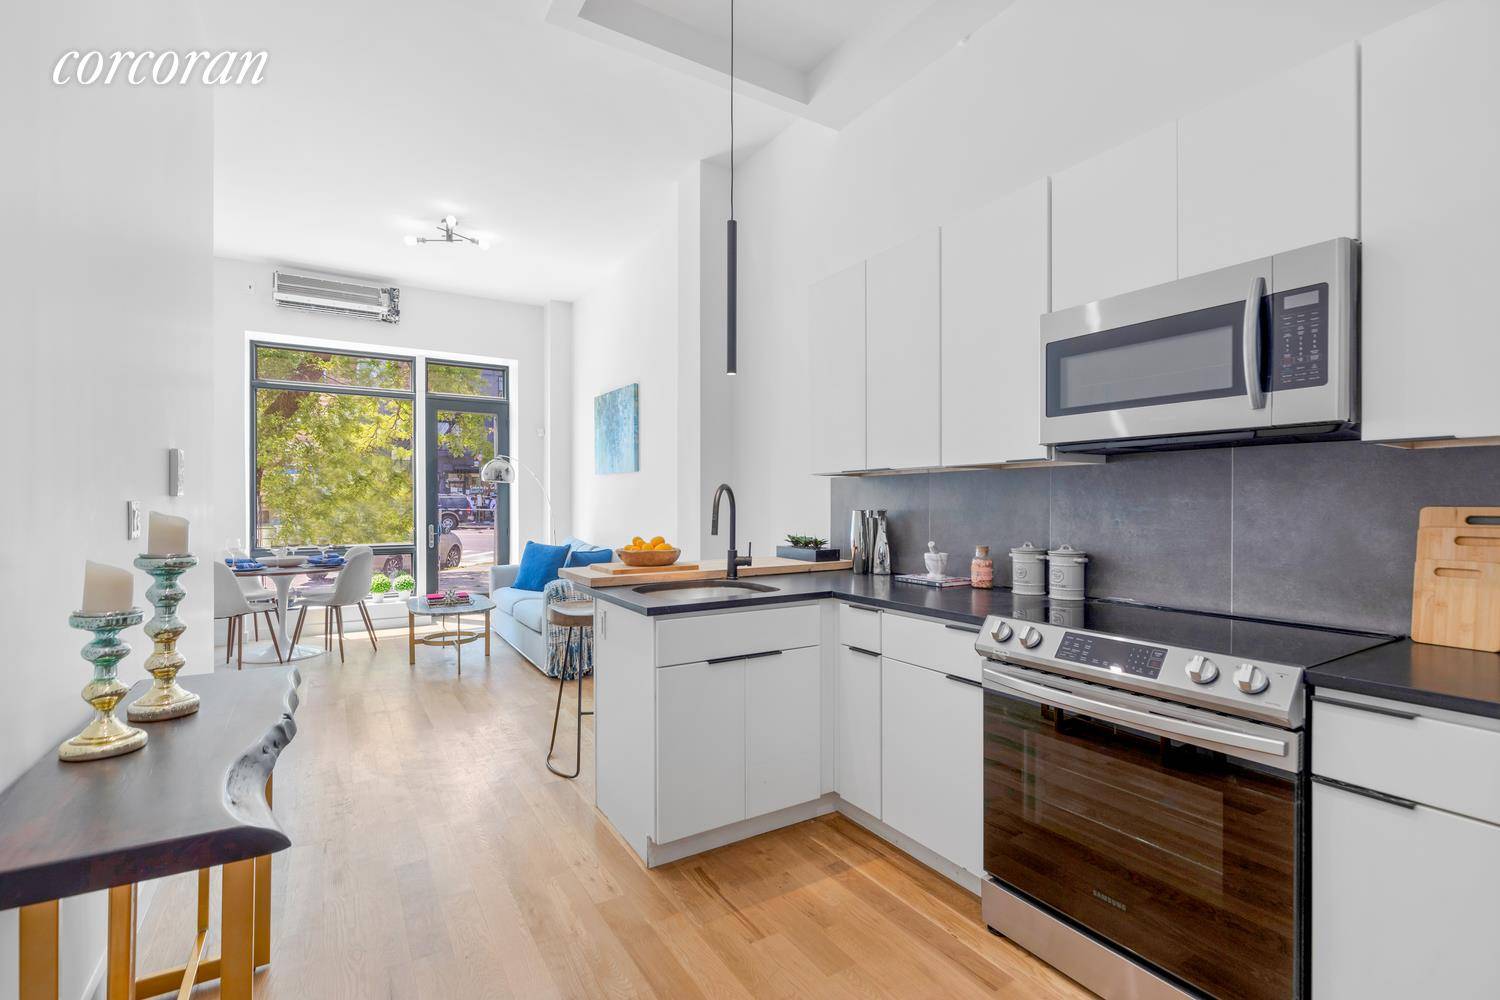 Unveiling 11A Somers Street ; a tastefully developed brand new condominium featuring four full floor, two bedroom residences in bustling Ocean Hill ; a subsection of Bedford Stuyvesant.